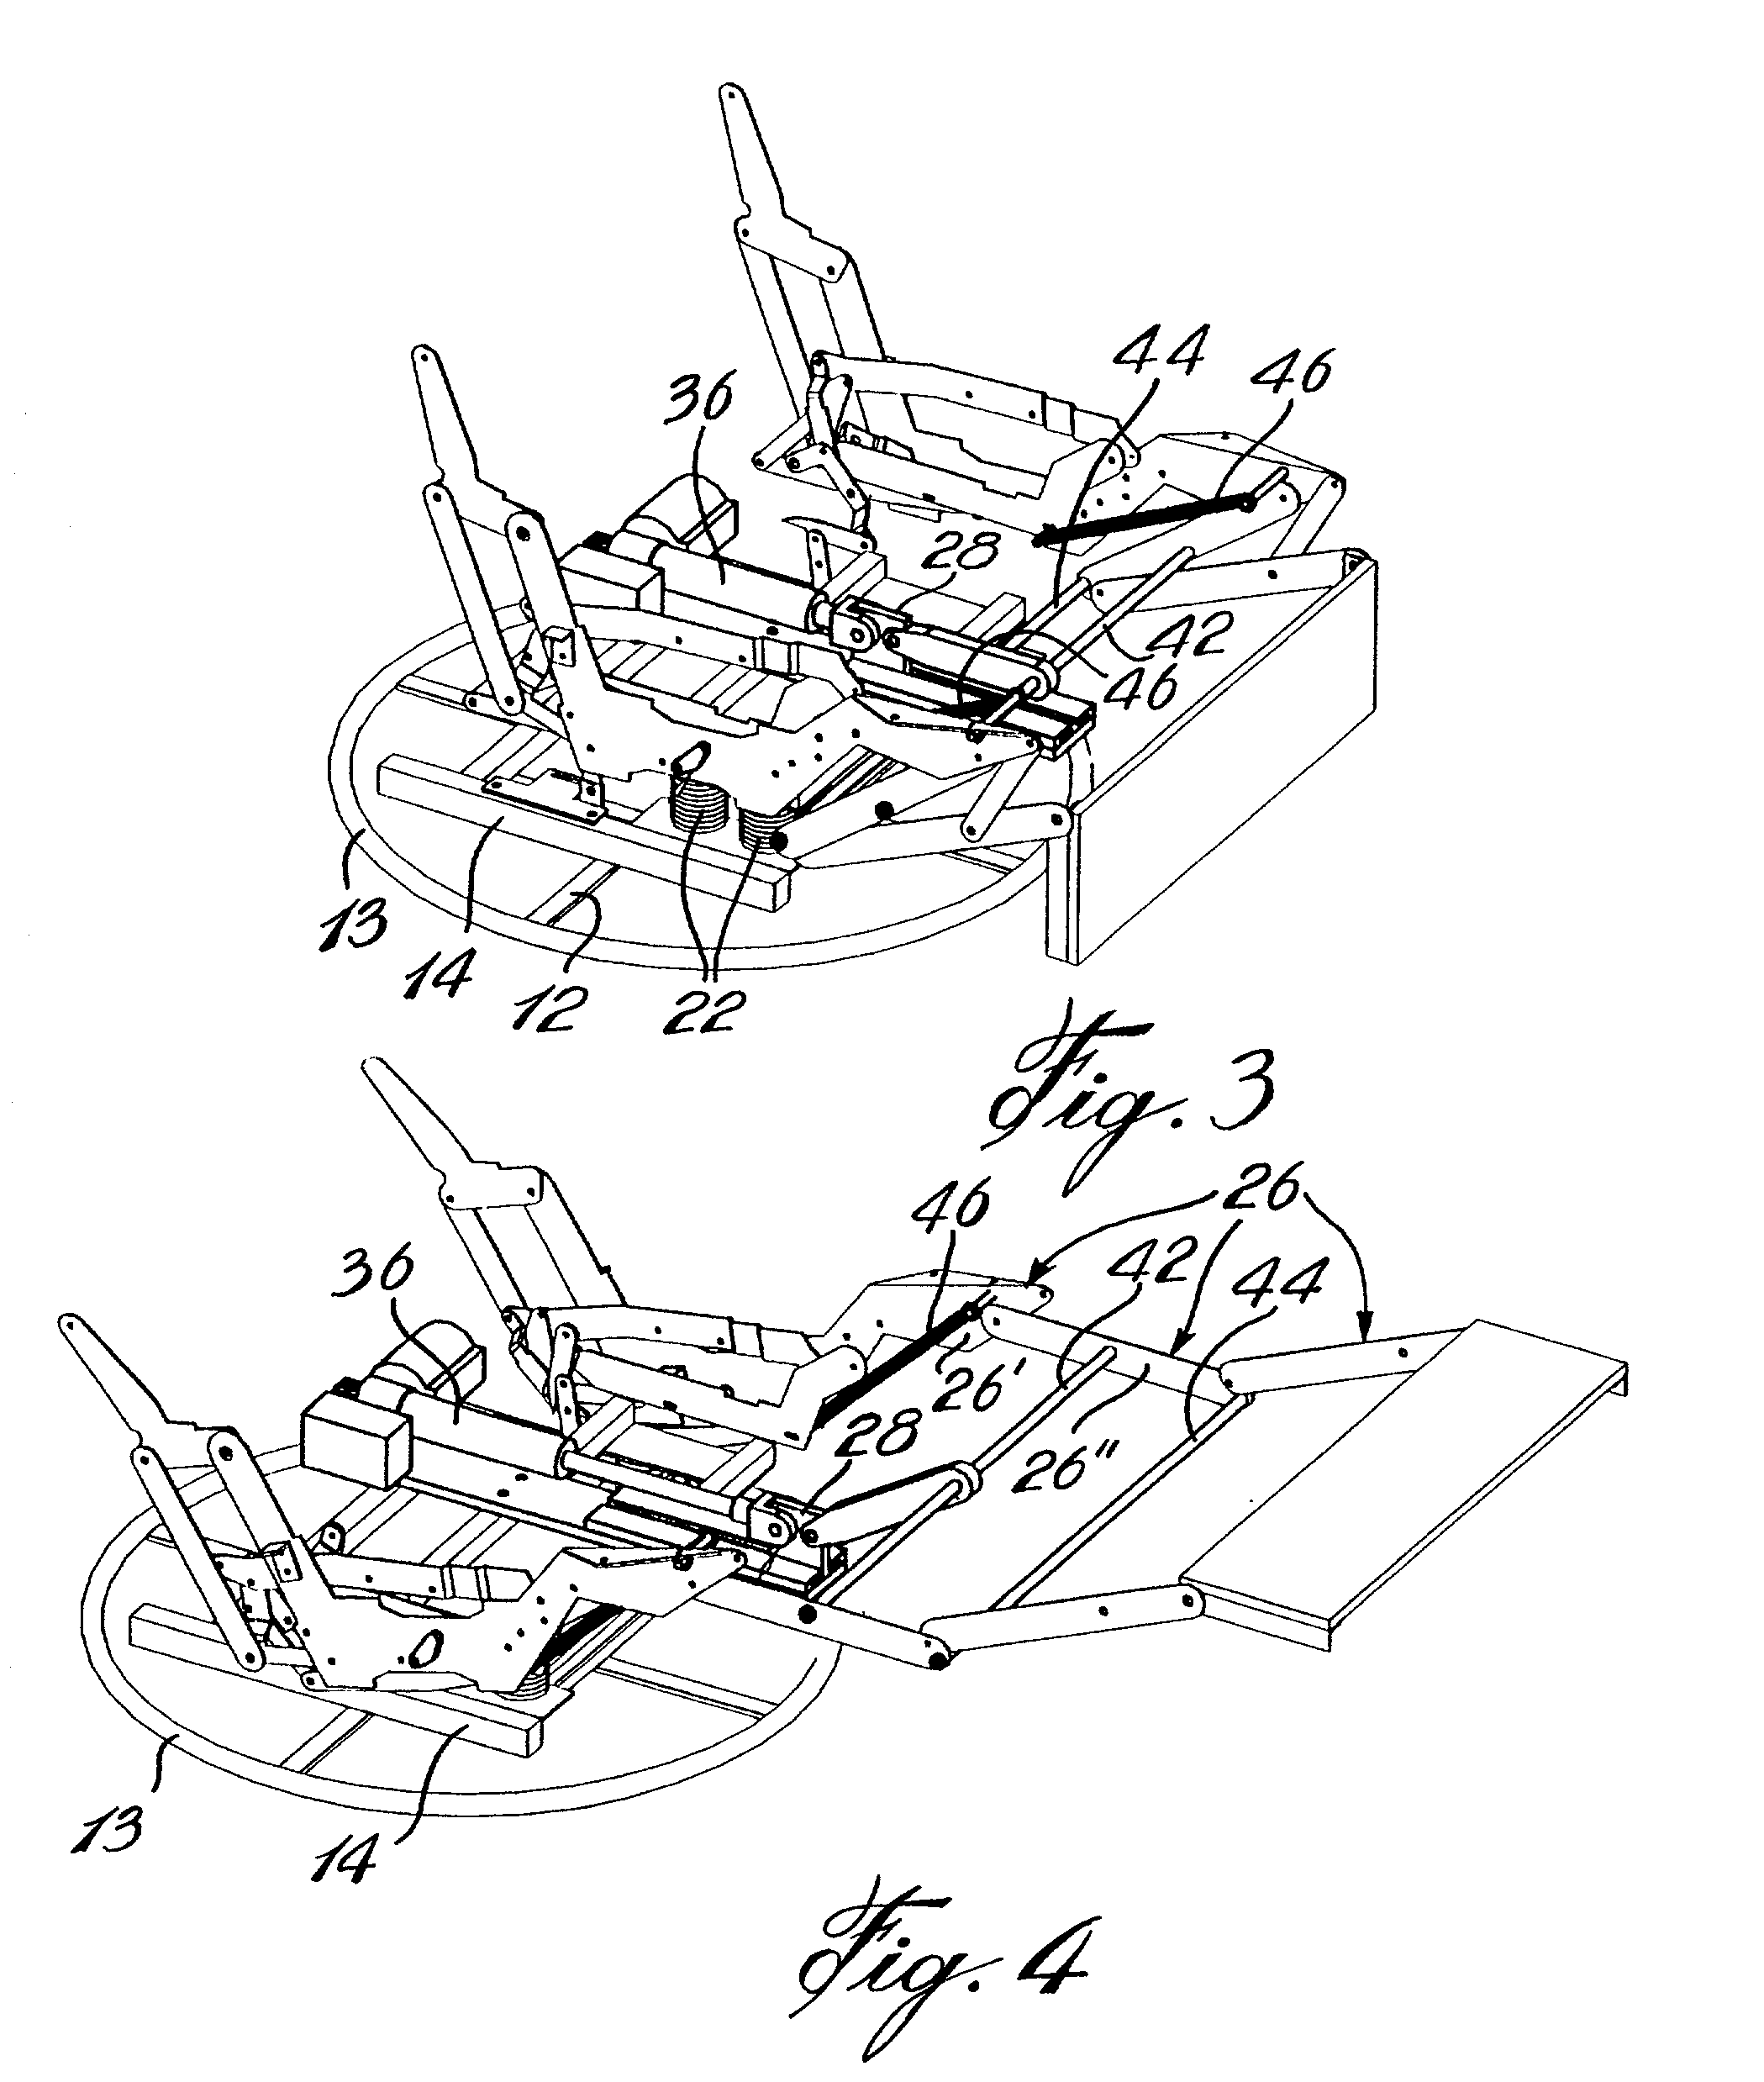 Reclining motorized multi-position chair with rocking and pivoting action